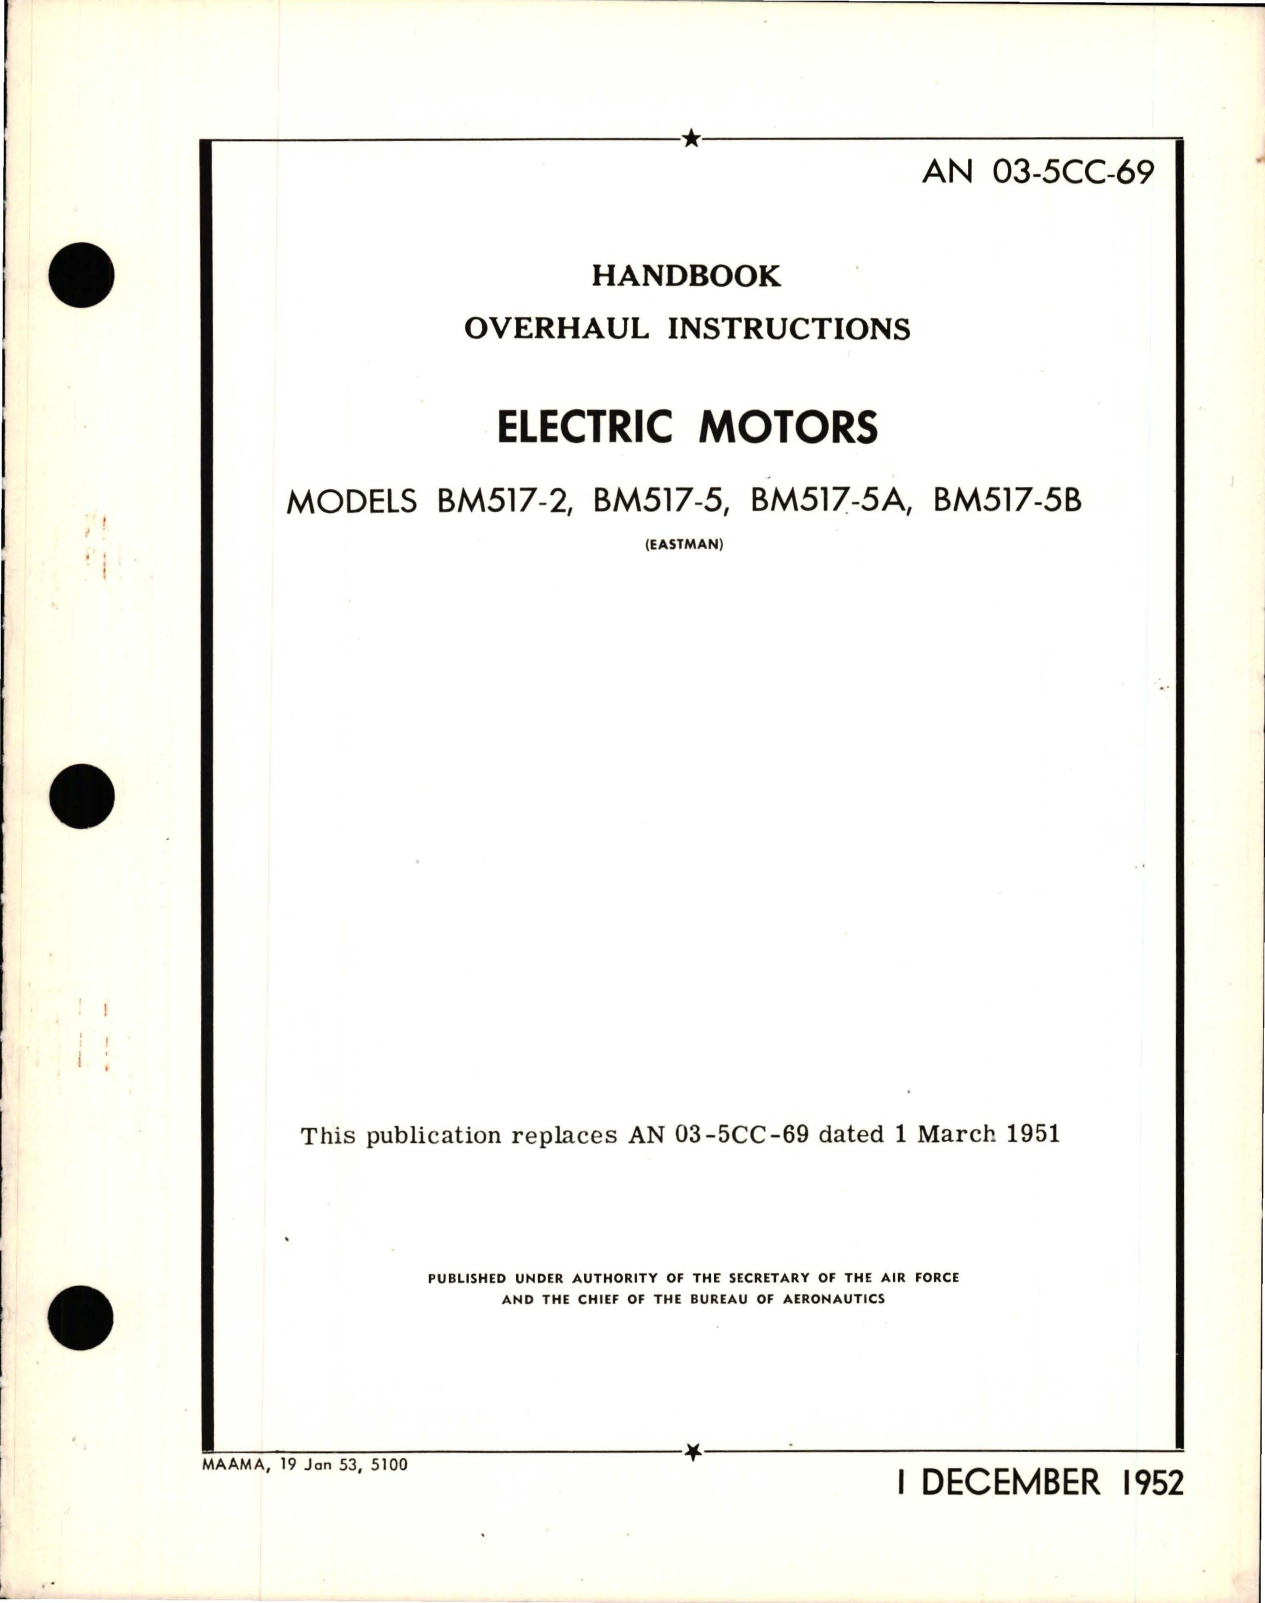 Sample page 1 from AirCorps Library document: Overhaul Instructions for Electric Motors - Models BM517-2, -5, -5A, -5B